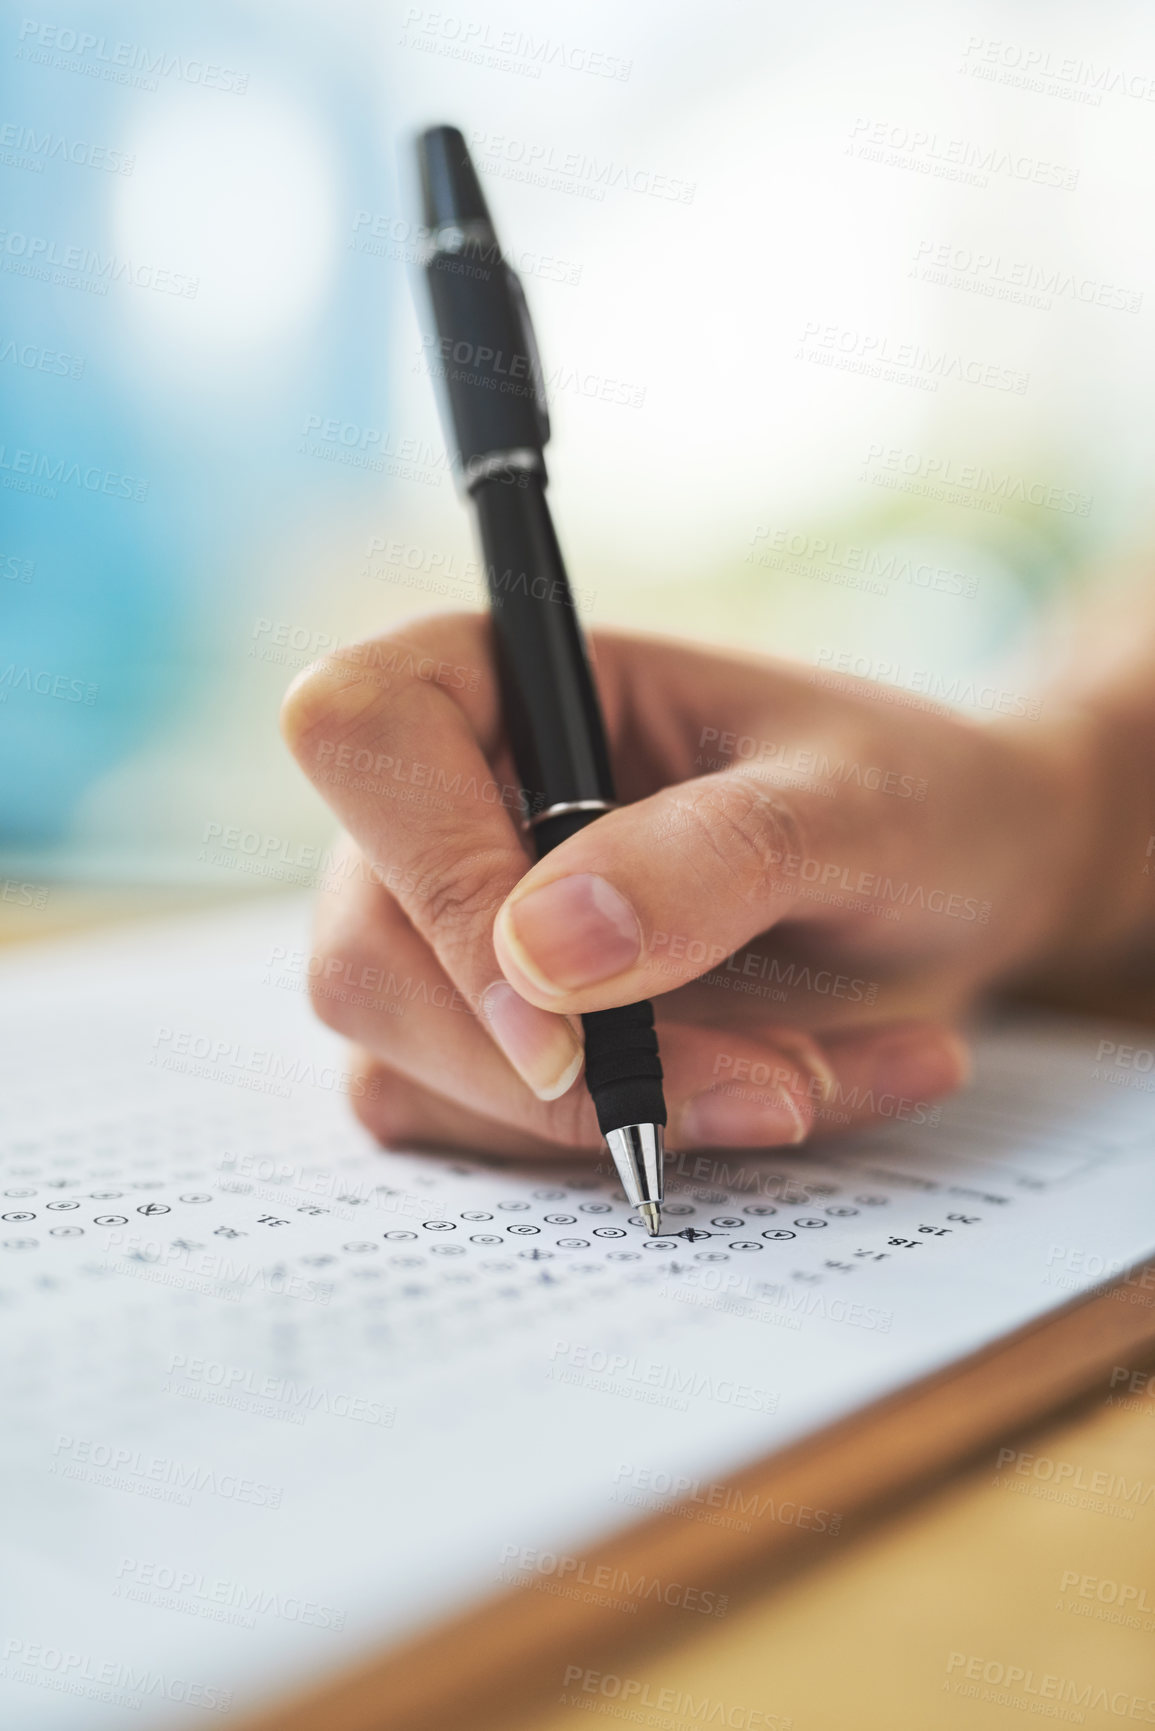 Buy stock photo Shot of a woman filling in an answer sheet for a test